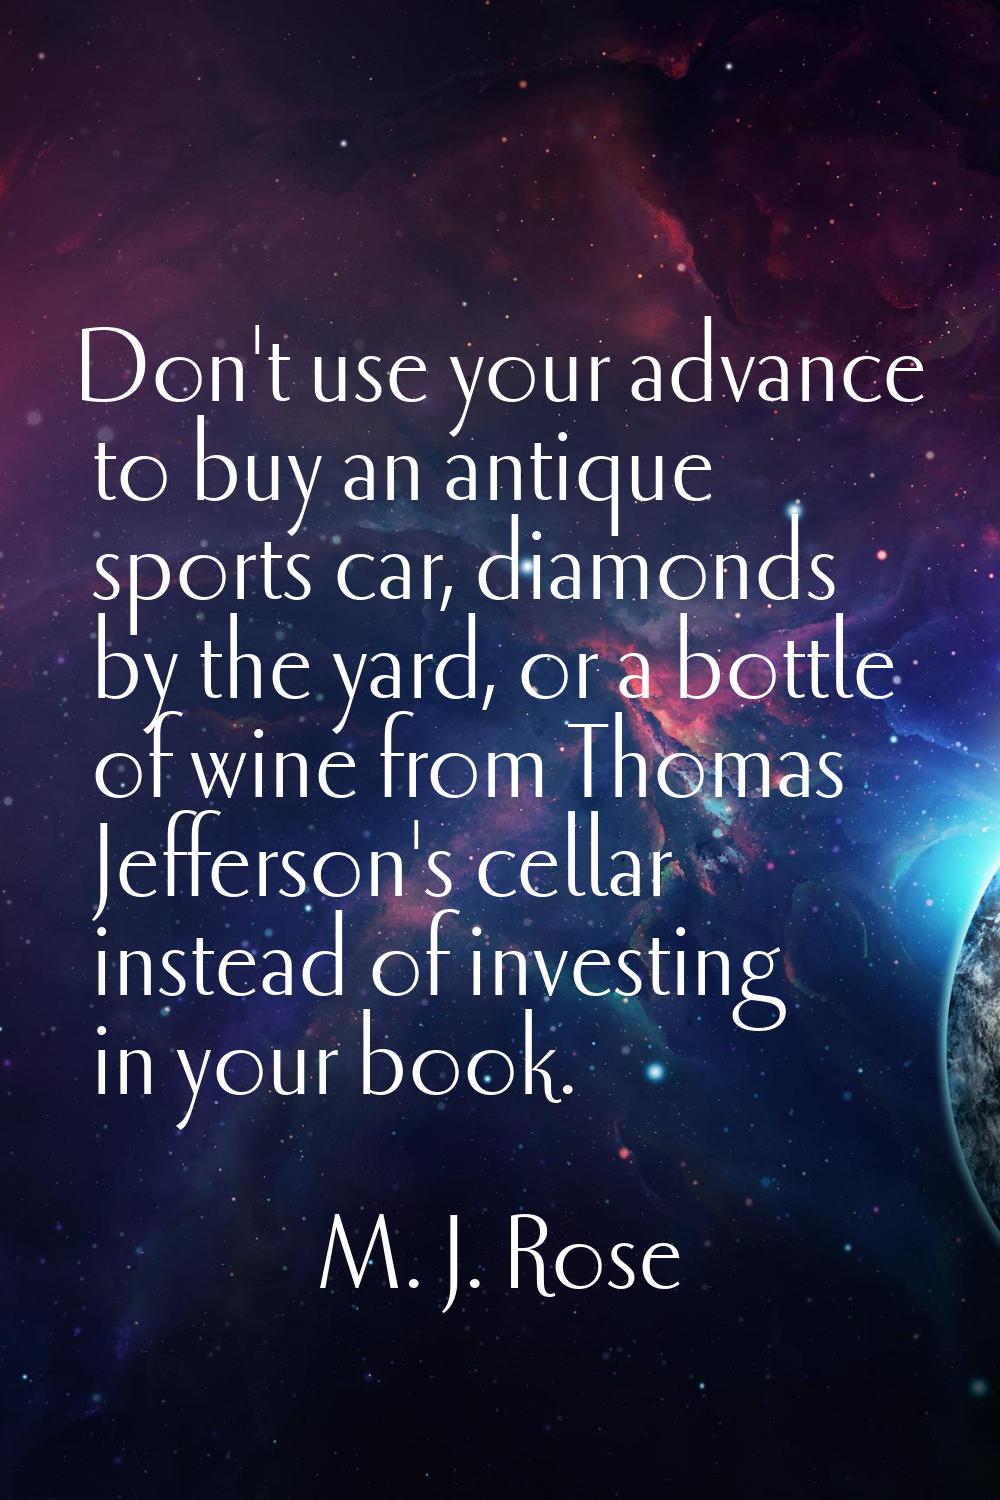 Don't use your advance to buy an antique sports car, diamonds by the yard, or a bottle of wine from